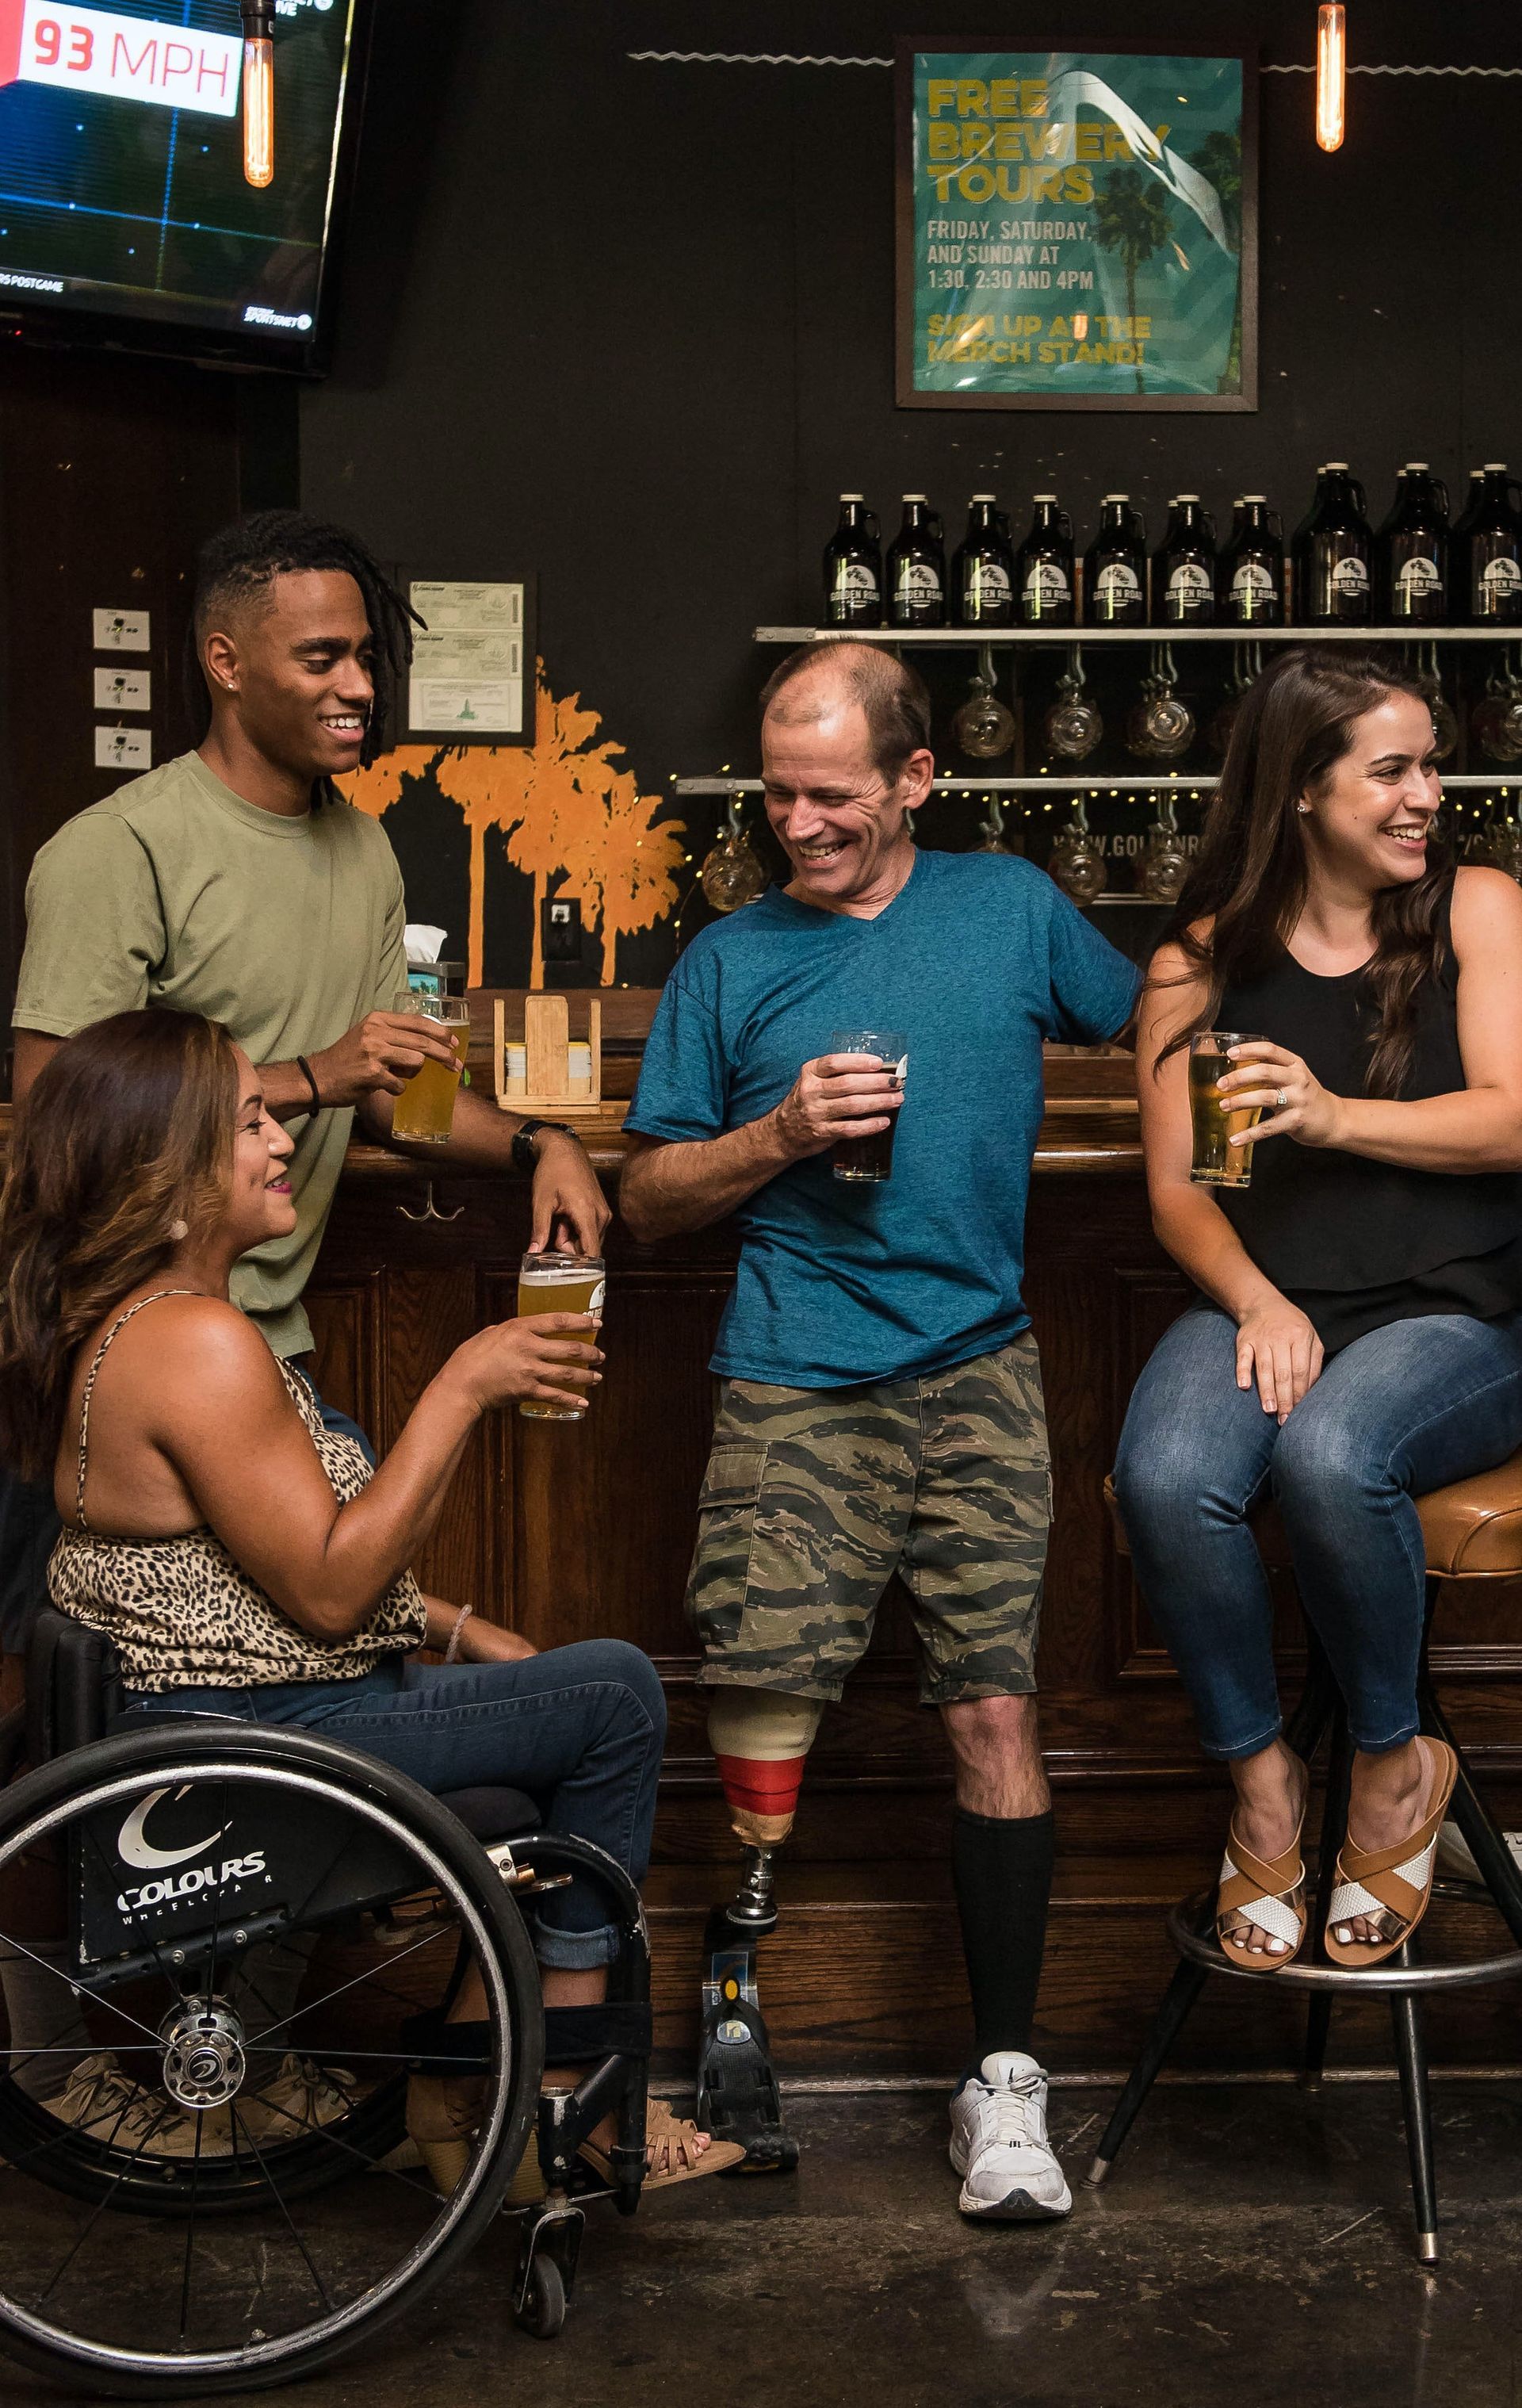 A group of friends with mixed abilities share a drink at a bar.